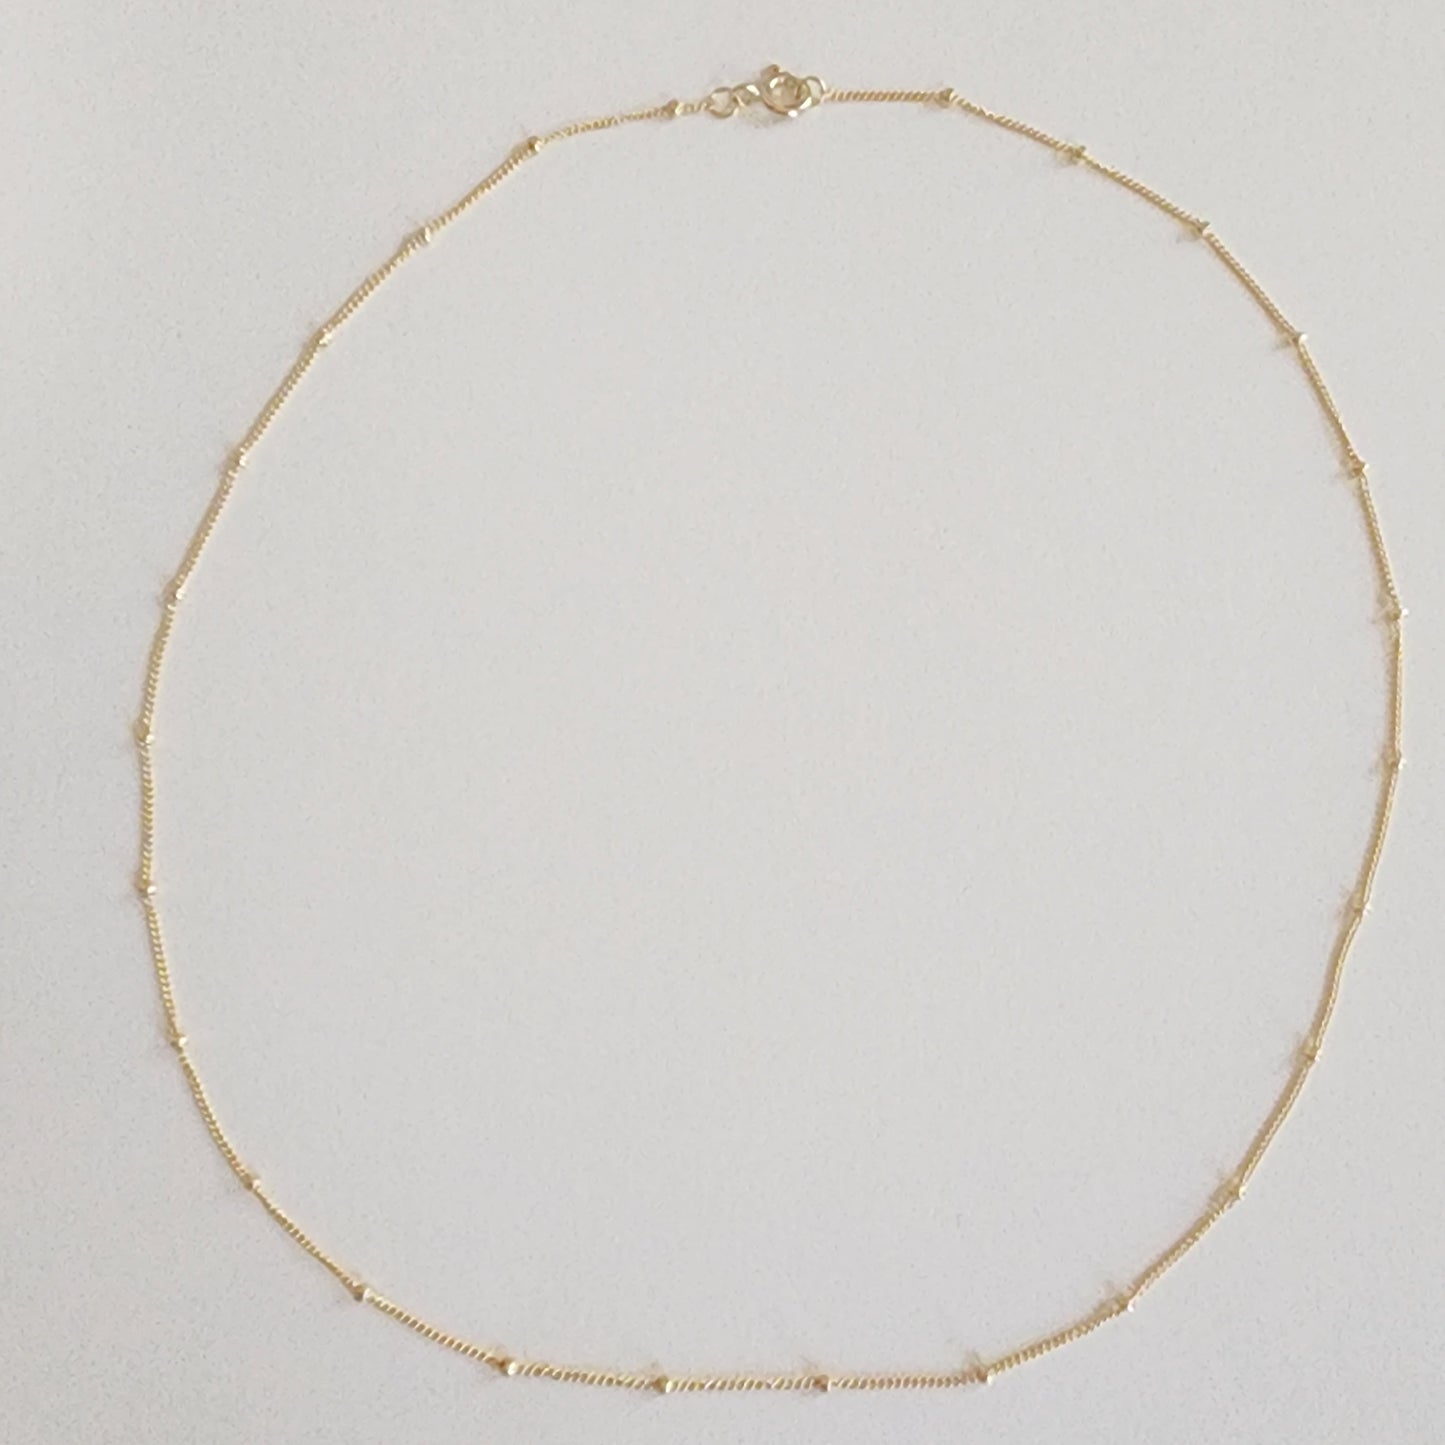 Gold Chain - Beaded Cable - Going Golden